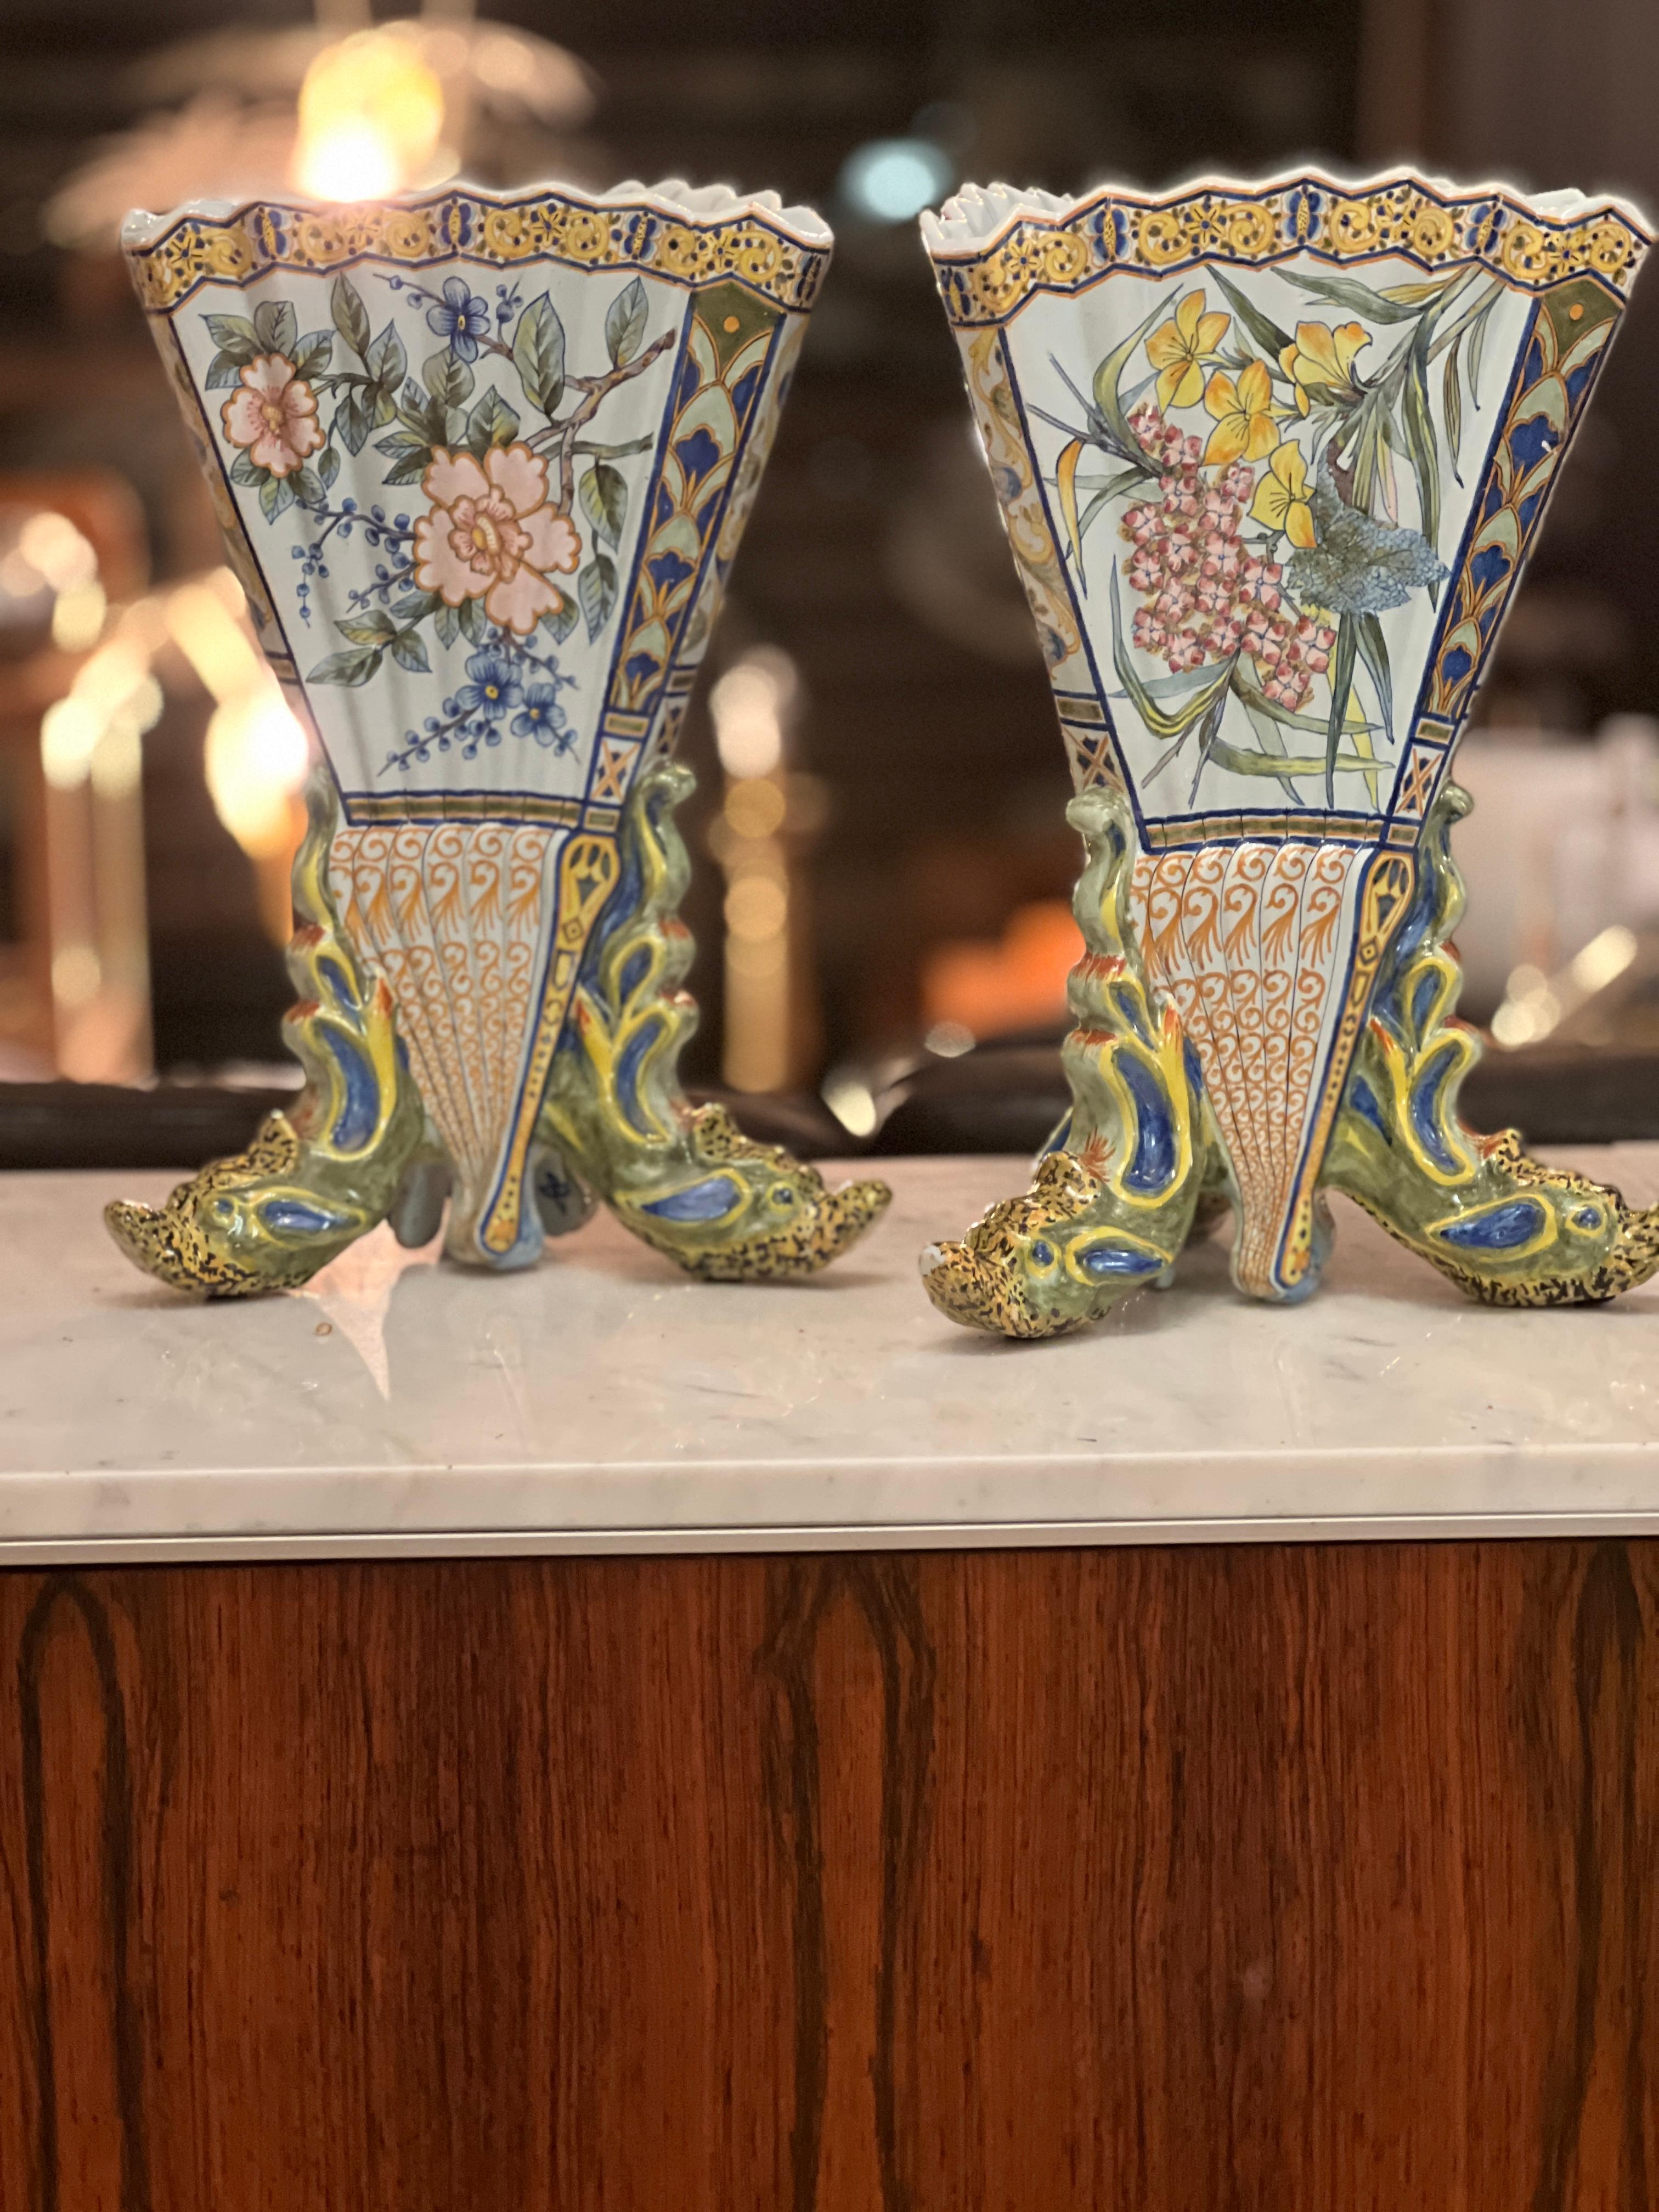 Pair of 19th Century French Hand Painted Faience Vase by Porquier Beau Quimper For Sale 1